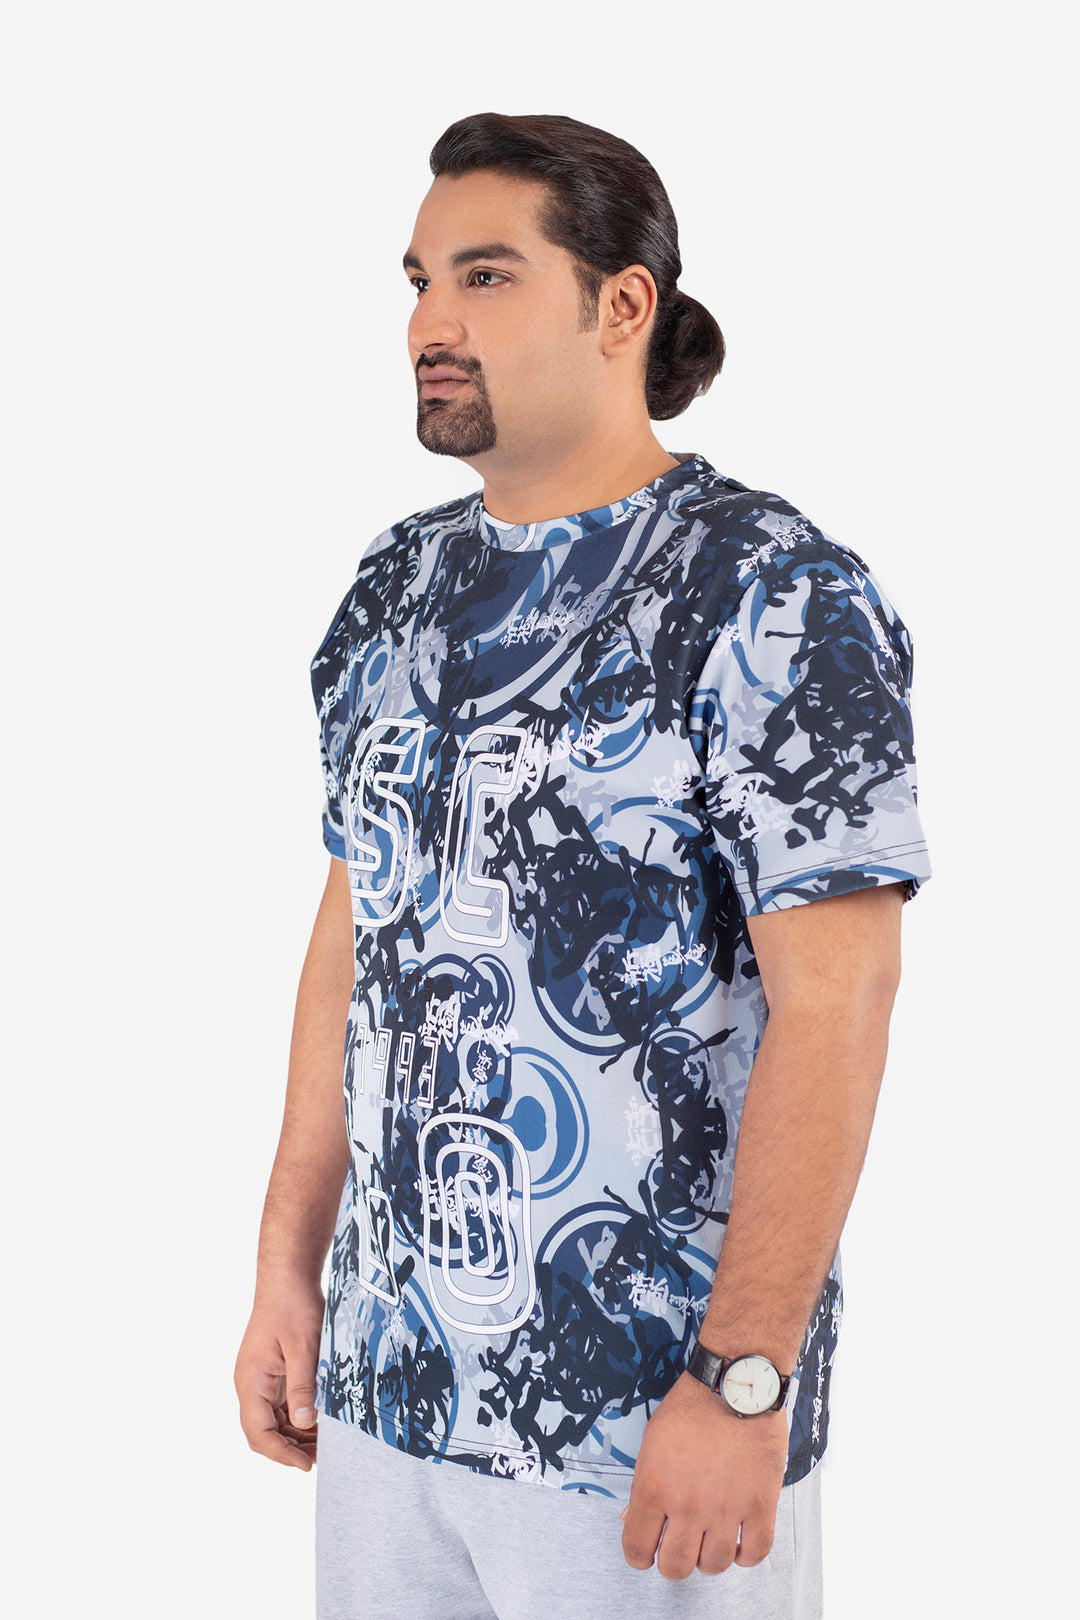 Plus Size Patterned T-Shirts in Pakistan